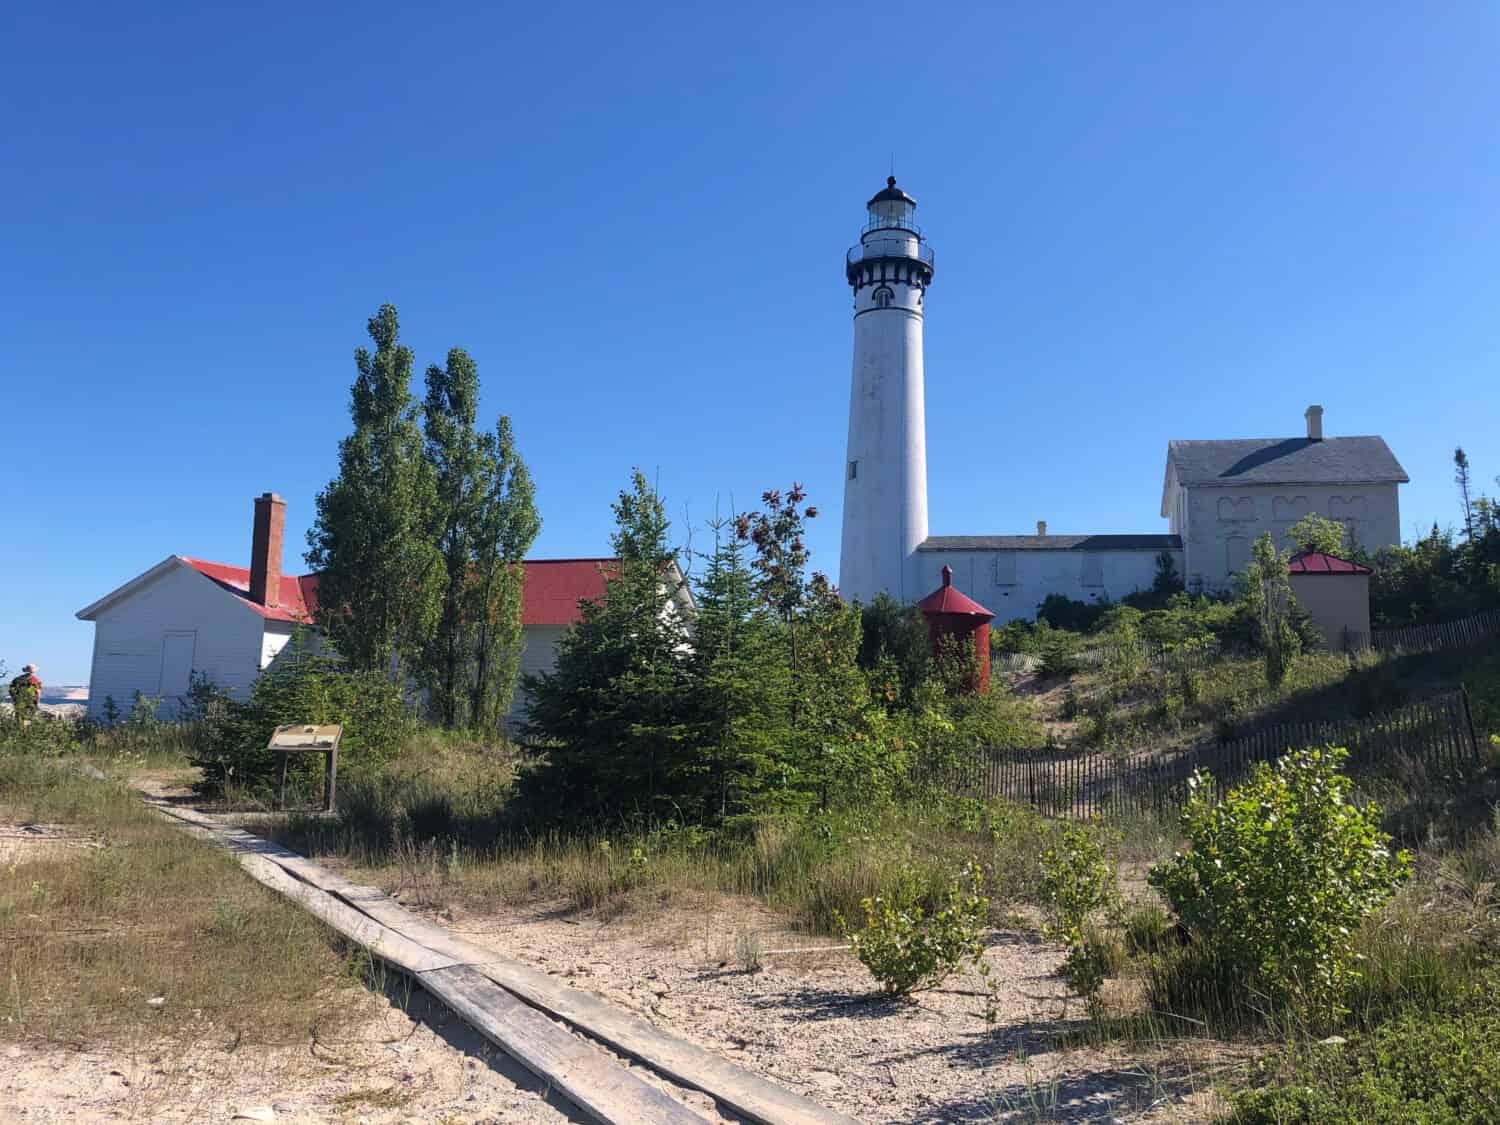 Pictures from South Manitou Island, Michigan